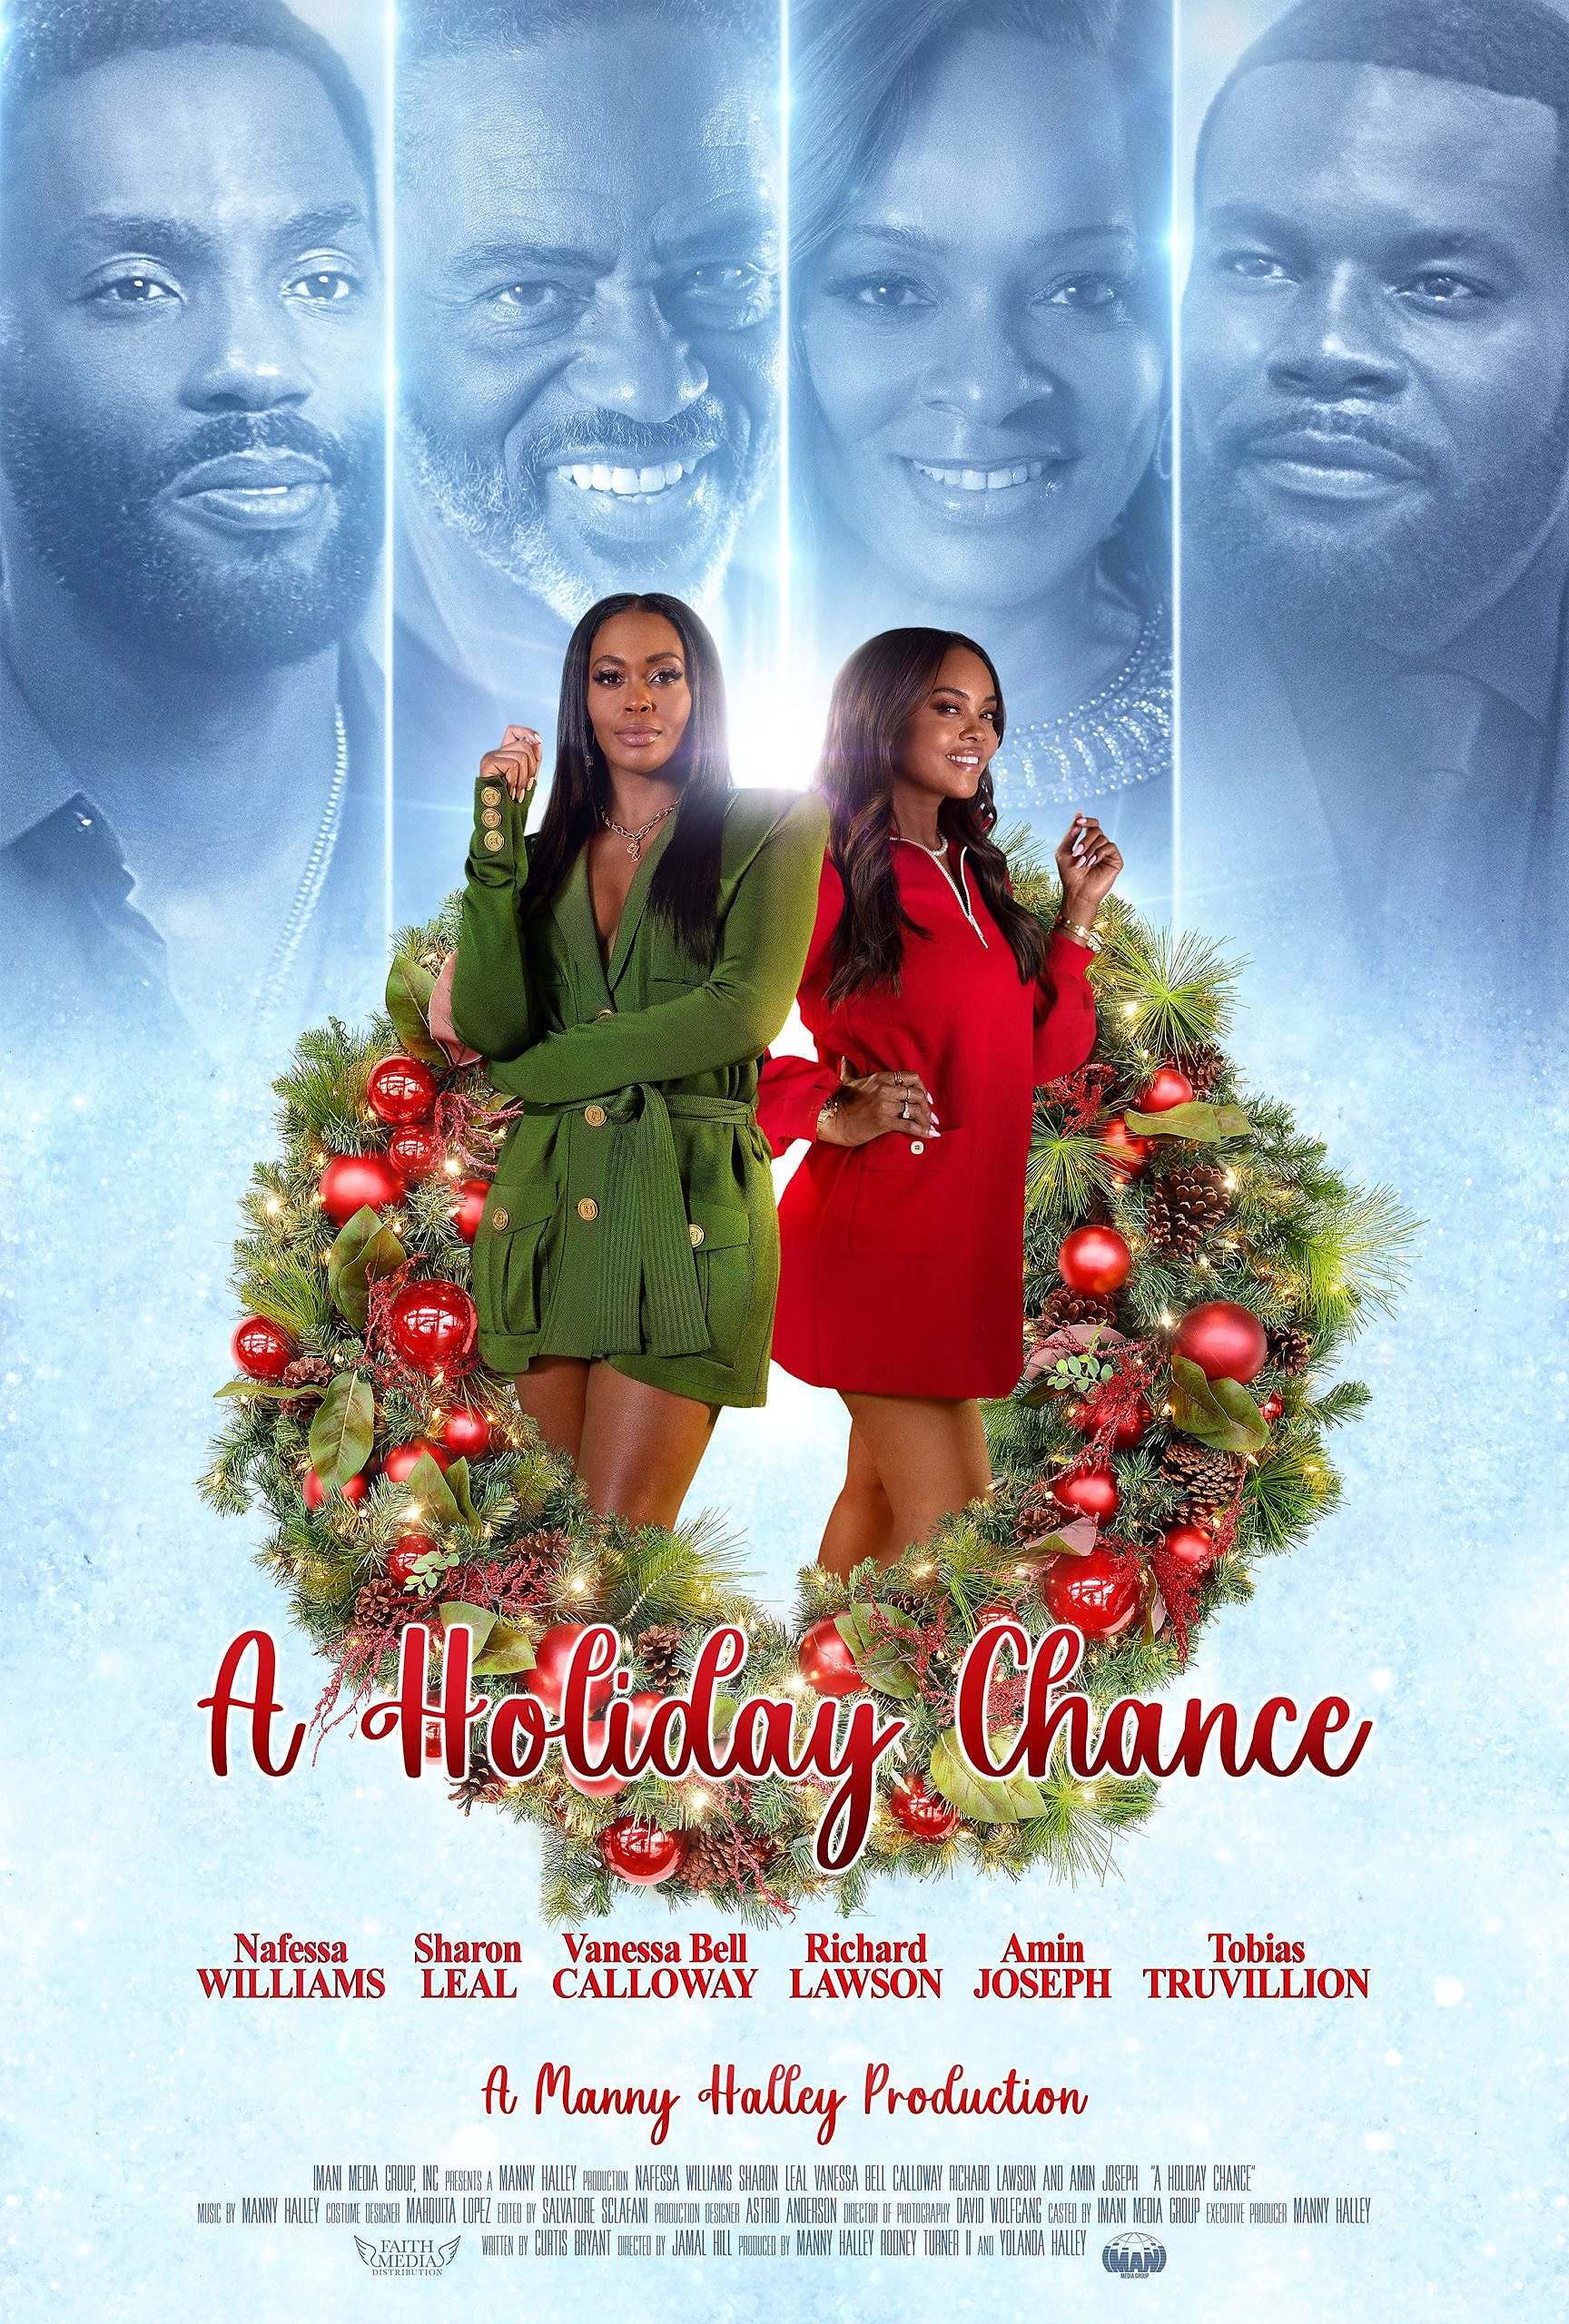 1st Trailer For 'A Holiday Chance' Movie